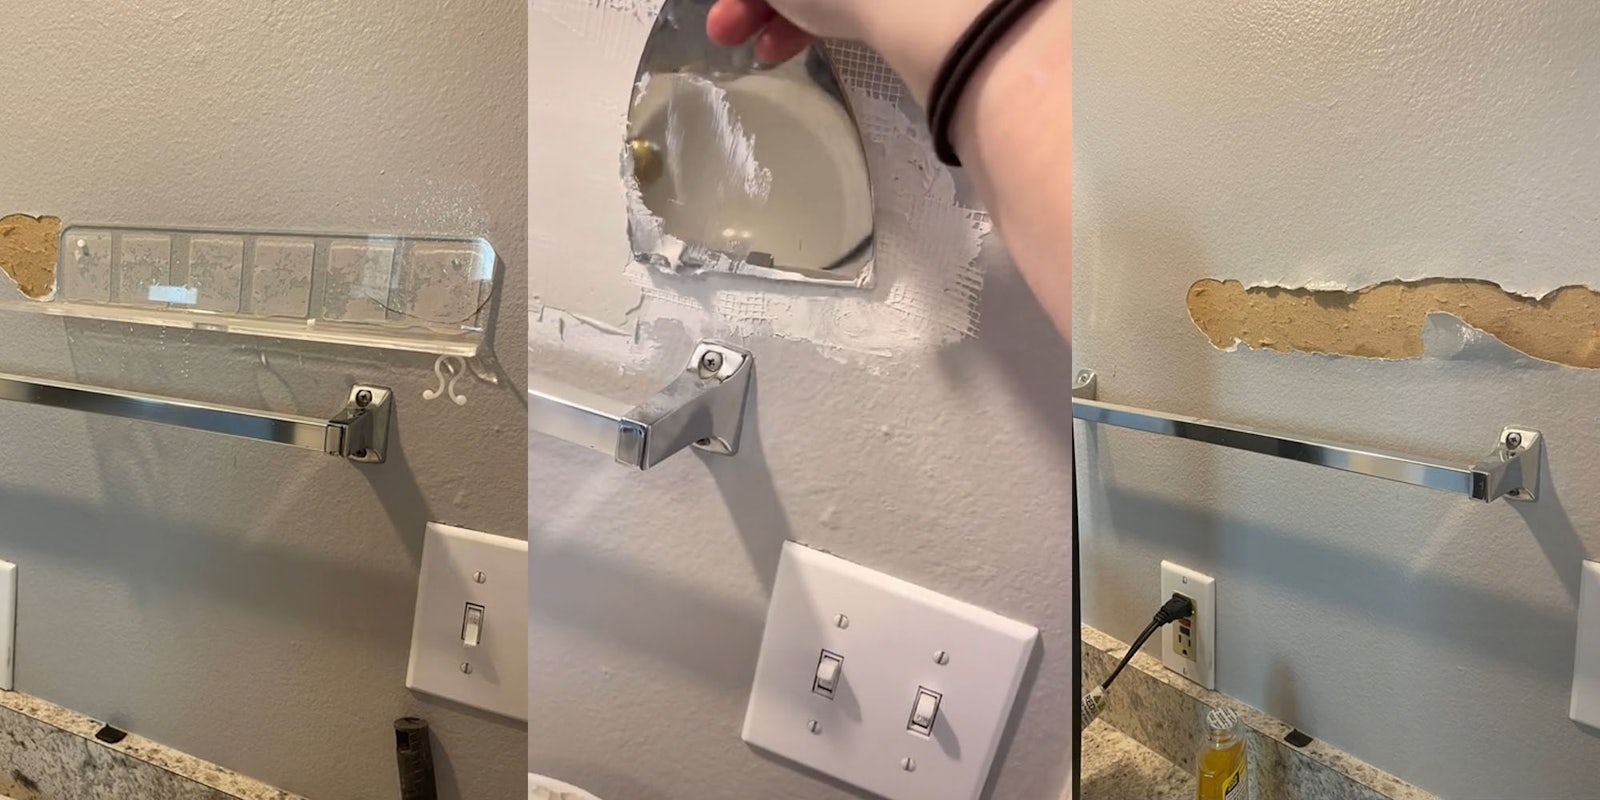 bathroom wall with clear shelf attached (l) Woman fixing wall holding scraper with paste over damage (c) damaged wall after 'renter friendly' wall shelf is removed (r)